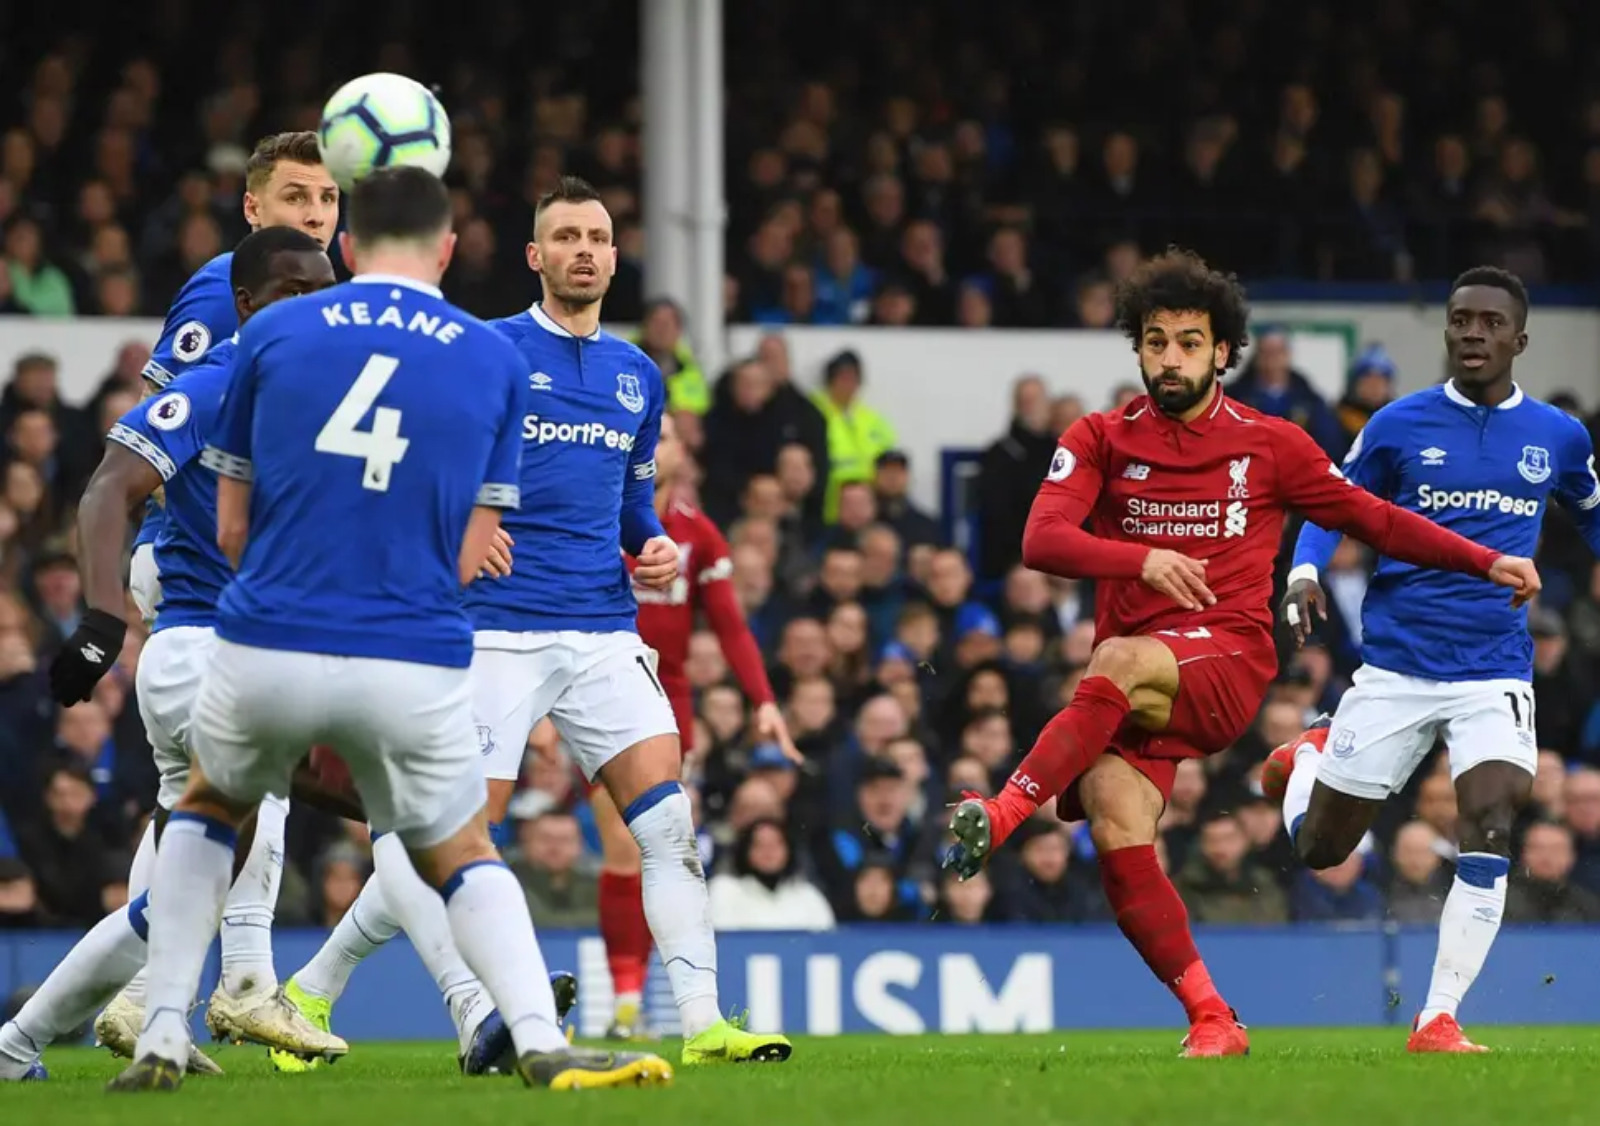 Merseyside Derby to be Played at Goodison Park or Neutral Venue?